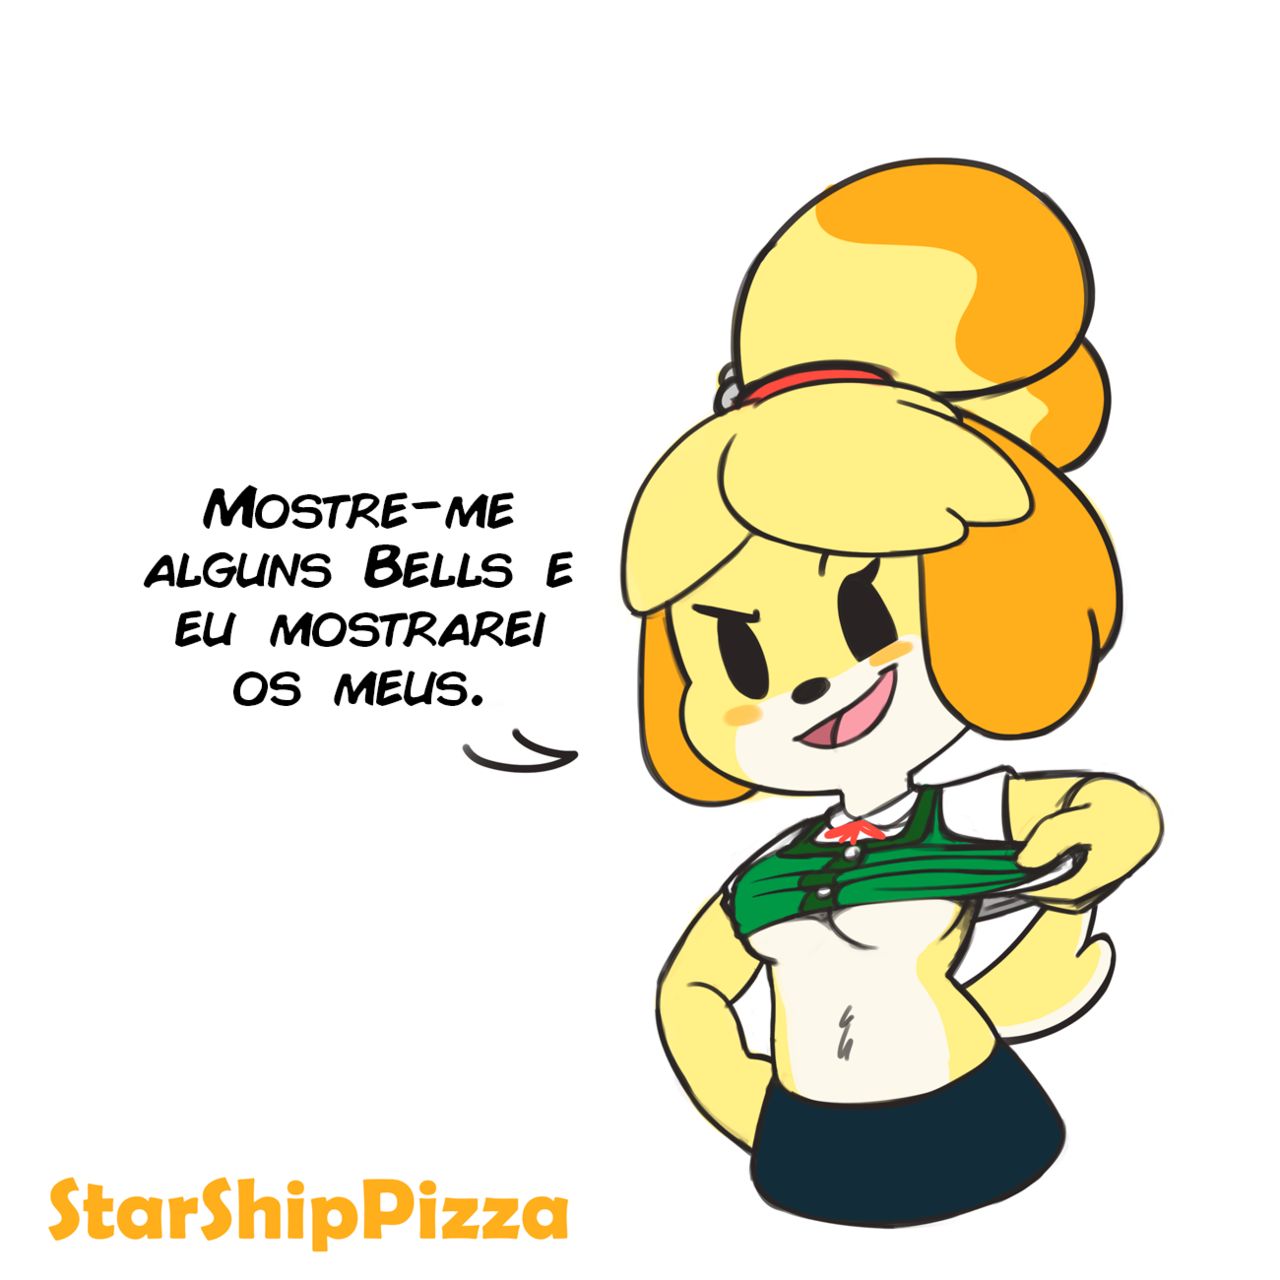 [Starshippizza] Isabel Playing With Fire